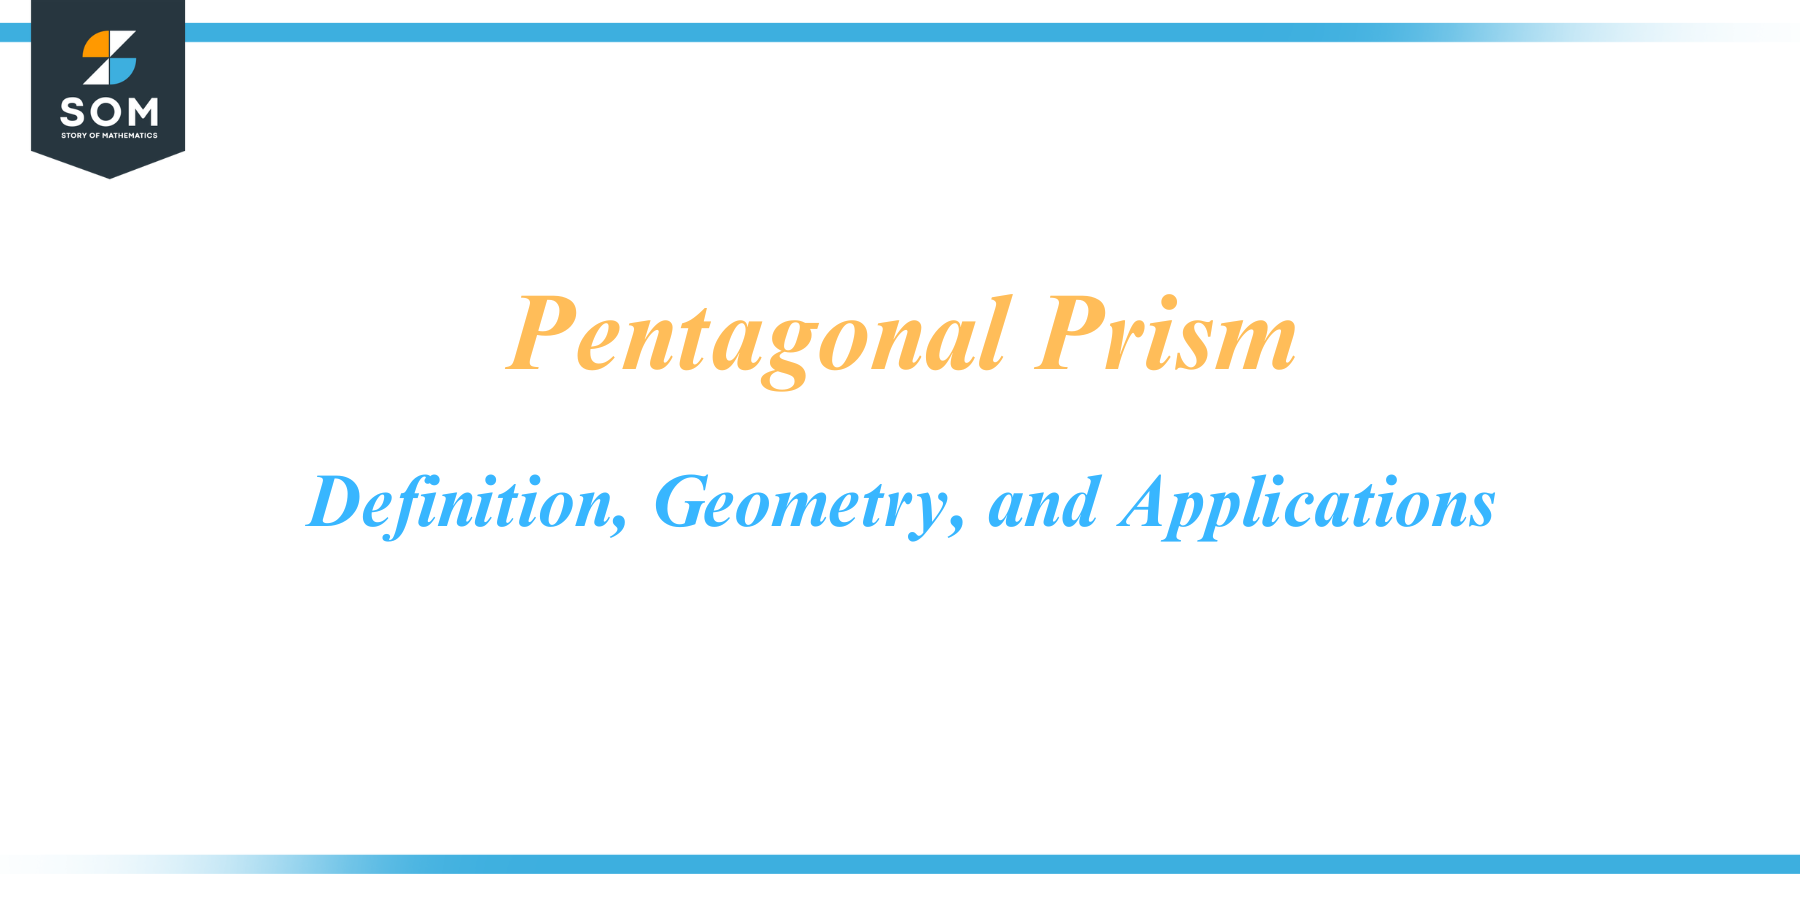 Pentagonal Prism Definition Geometry and Applications